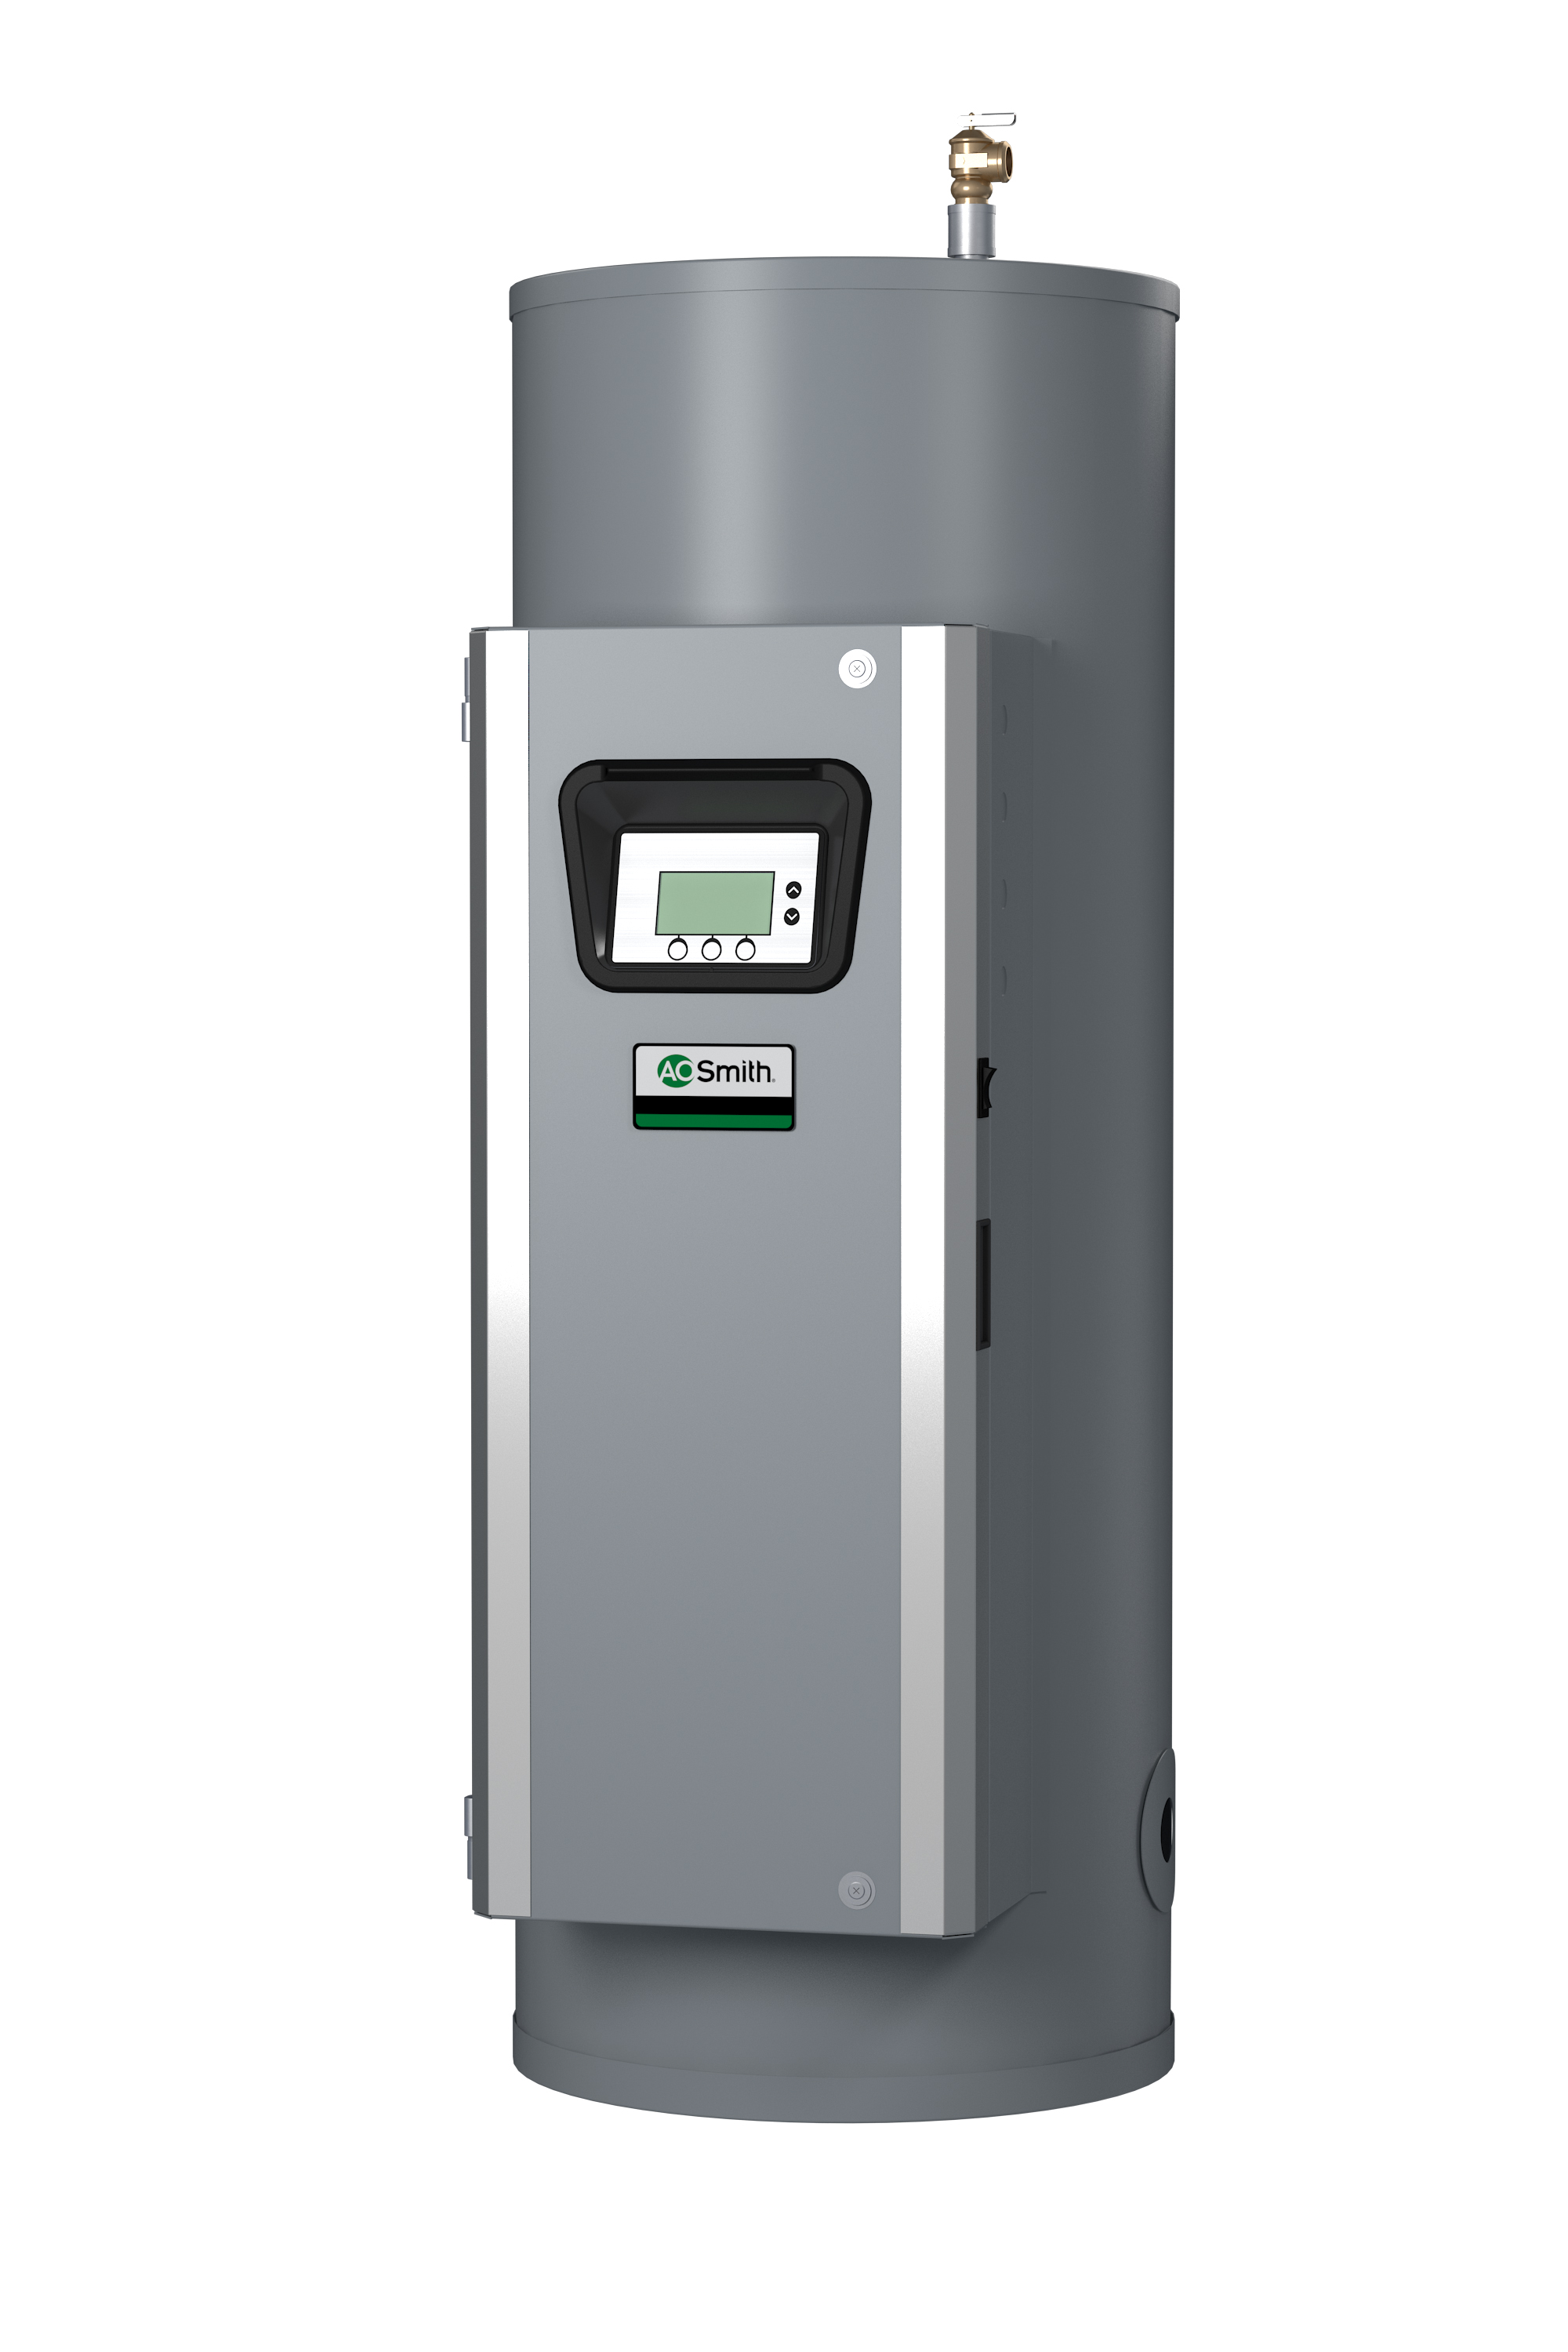 AO SMITH DSE-100A-36, 100 GALLONS, 36KW, 480 VOLT, 43.3 AMPS, 3 PHASE, 2 ELEMENTS, ASME CUSTOM Xi SERIES HEAVY DUTY COMMERCIAL ELECTRIC WATER HEATER